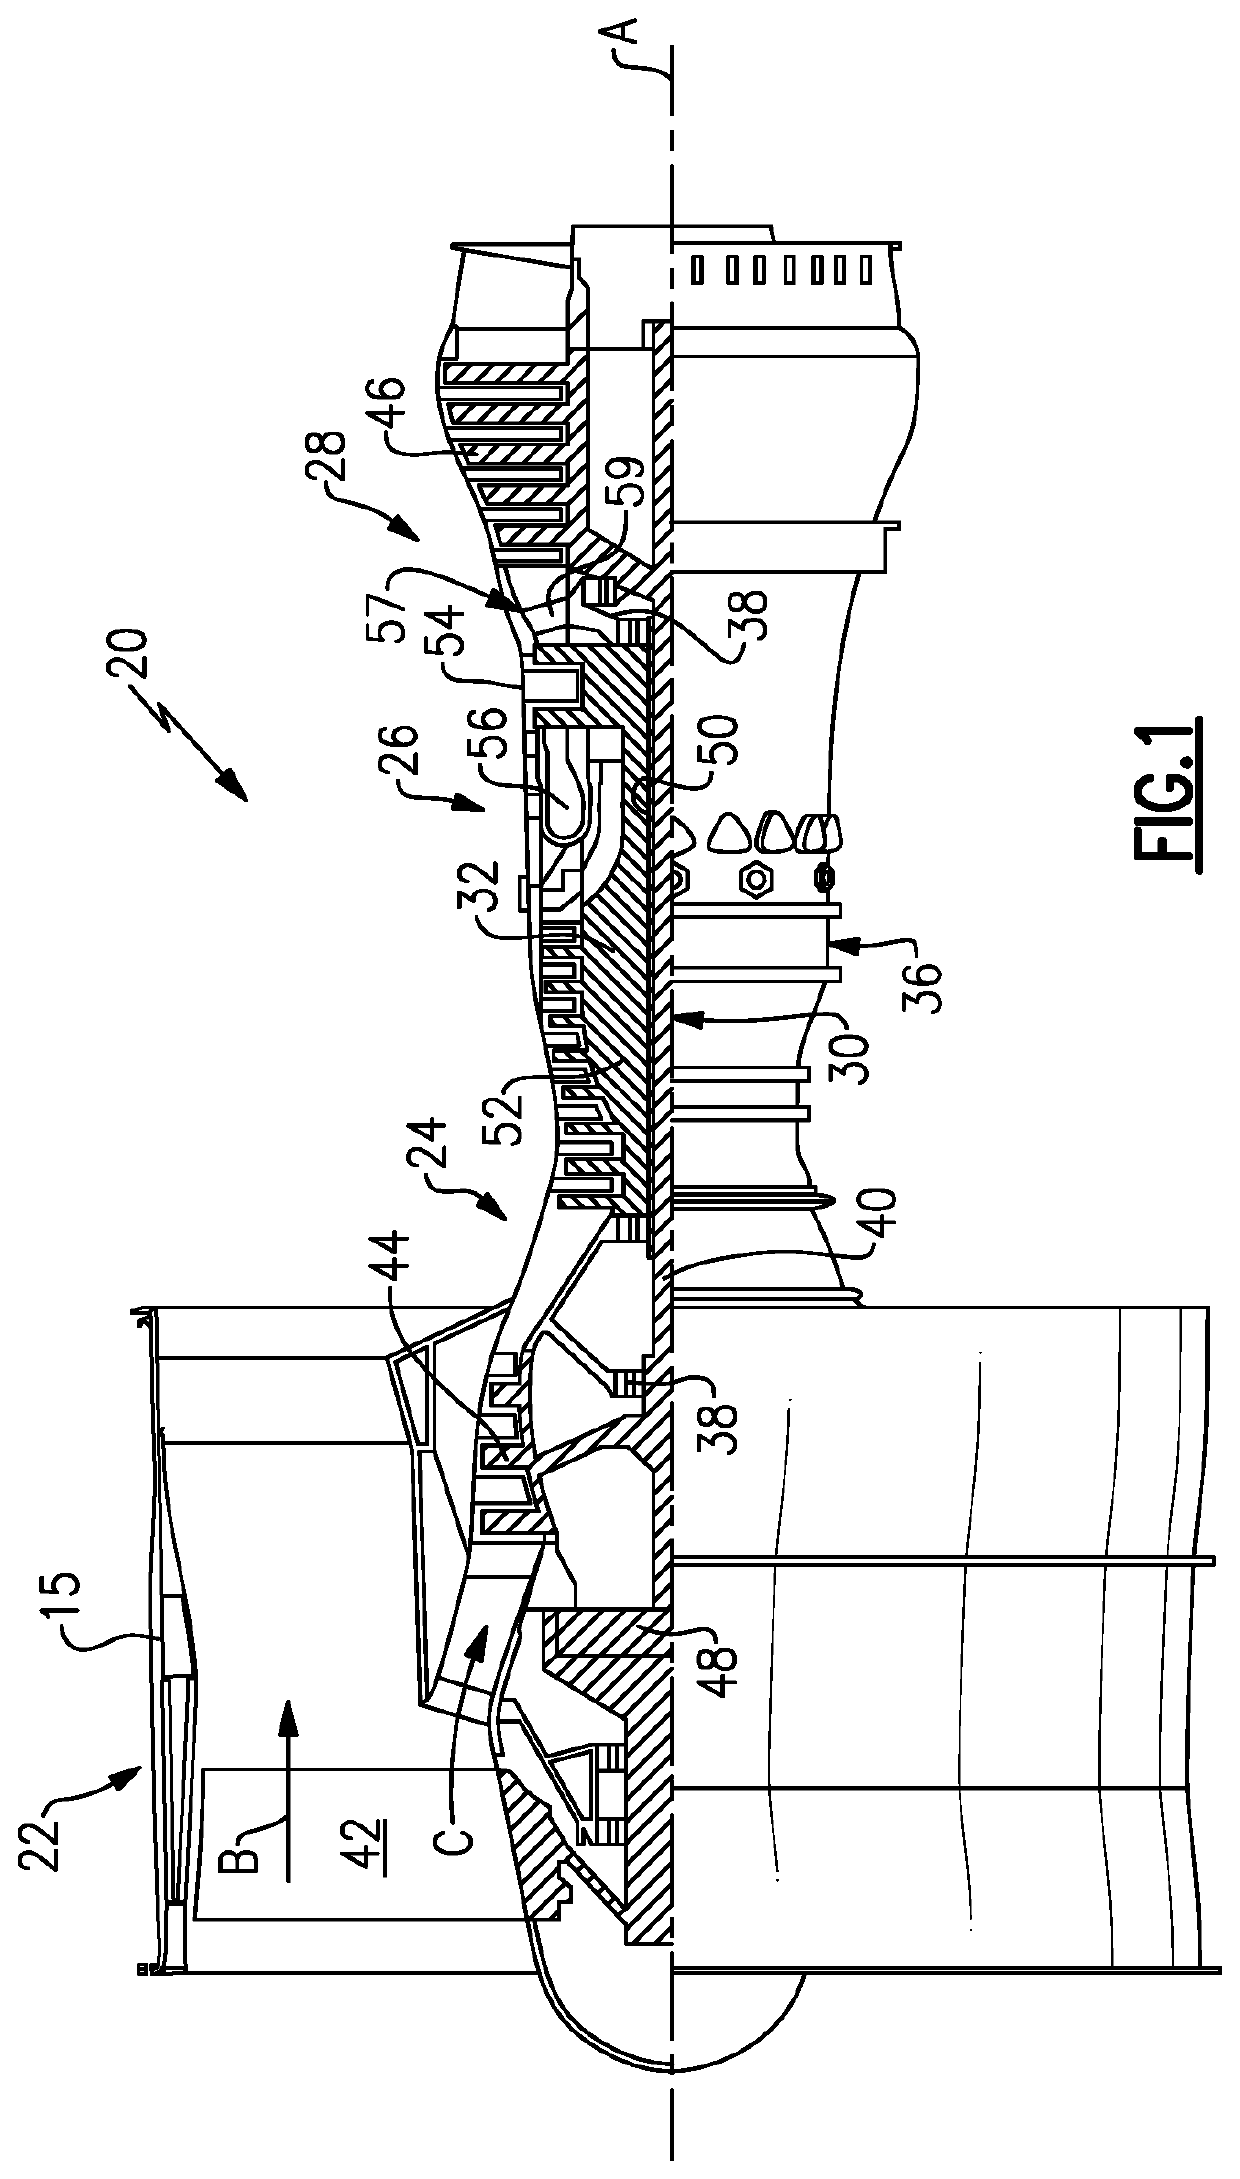 Work recovery system for a gas turbine engine utilizing an overexpanded, recuperated supercritical co2 cycle driven by cooled cooling air waste heat